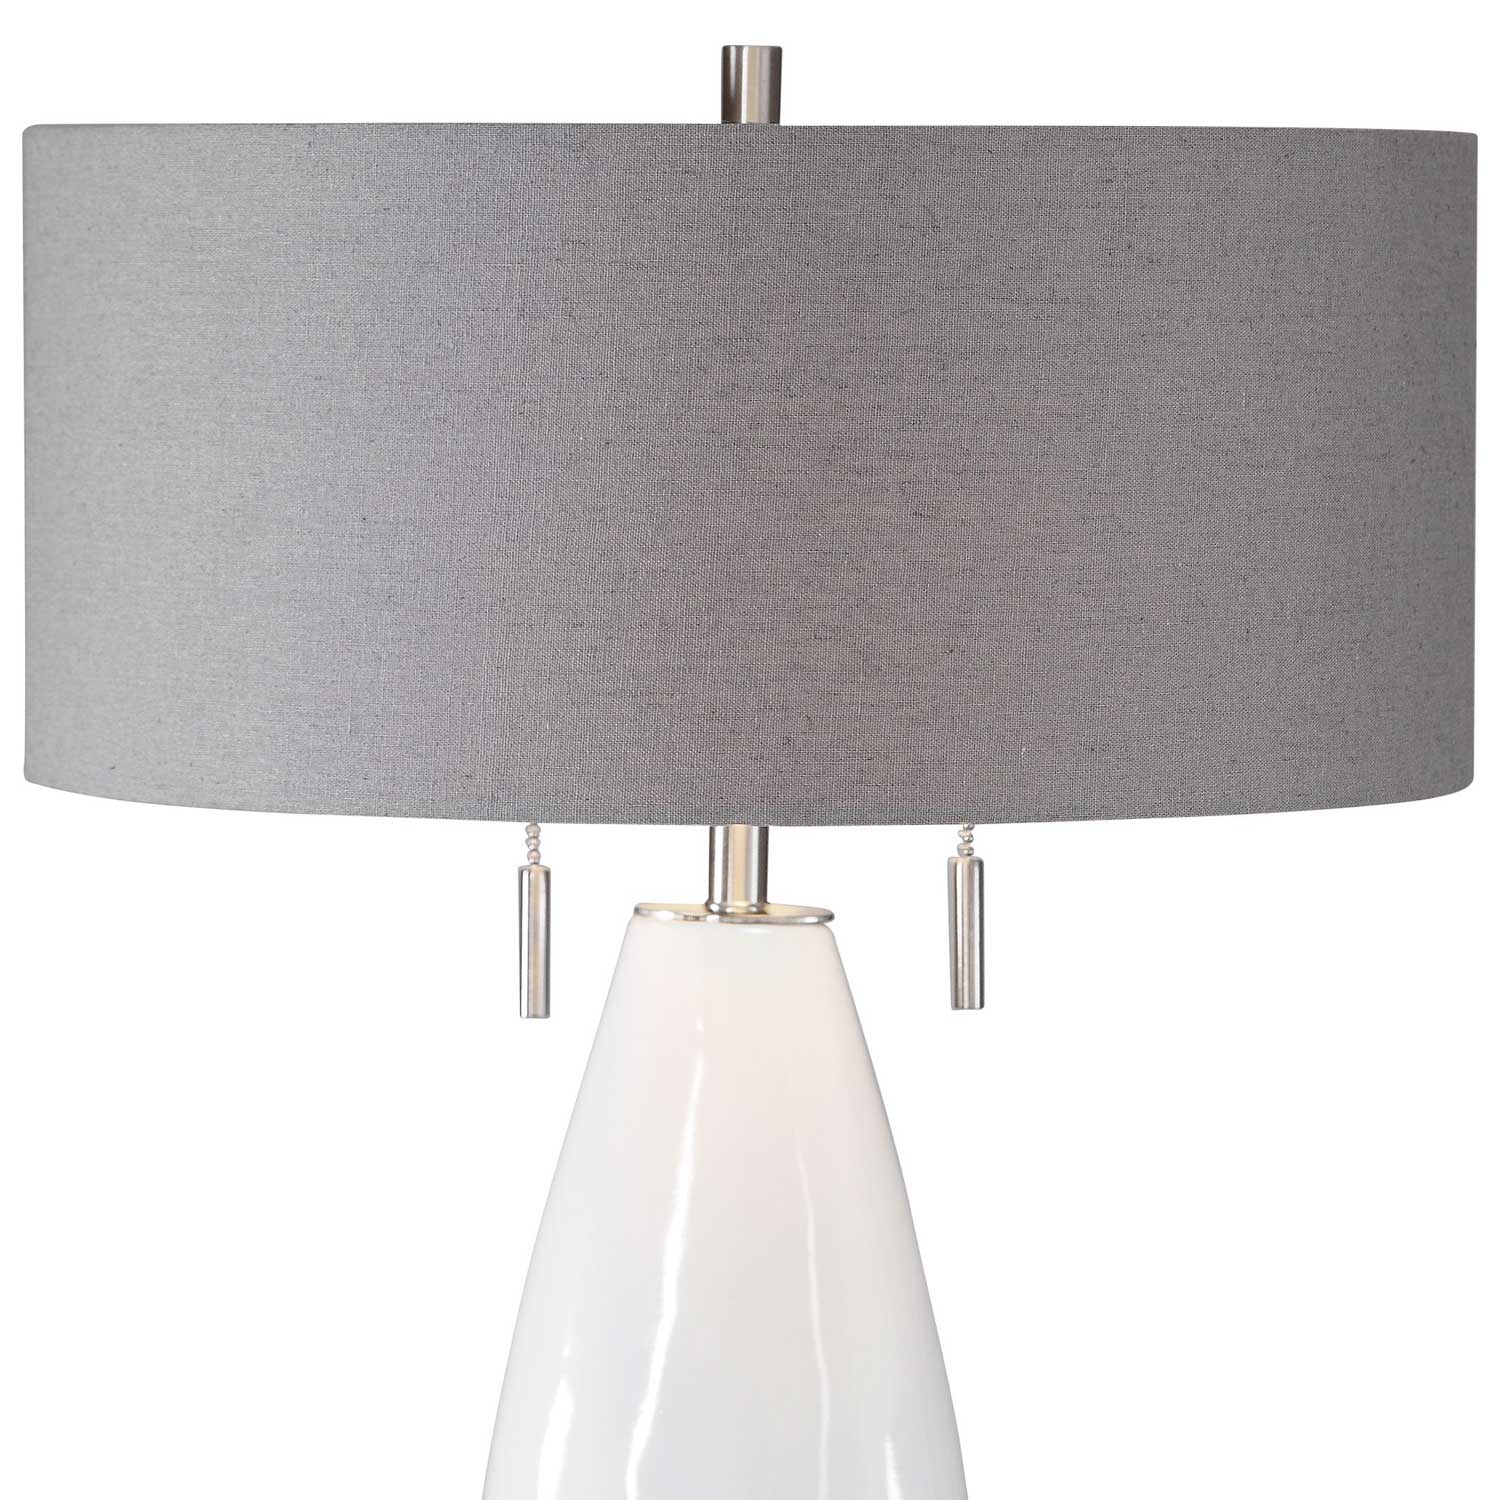 Uttermost Laurie Table Lamp - White Ceramic